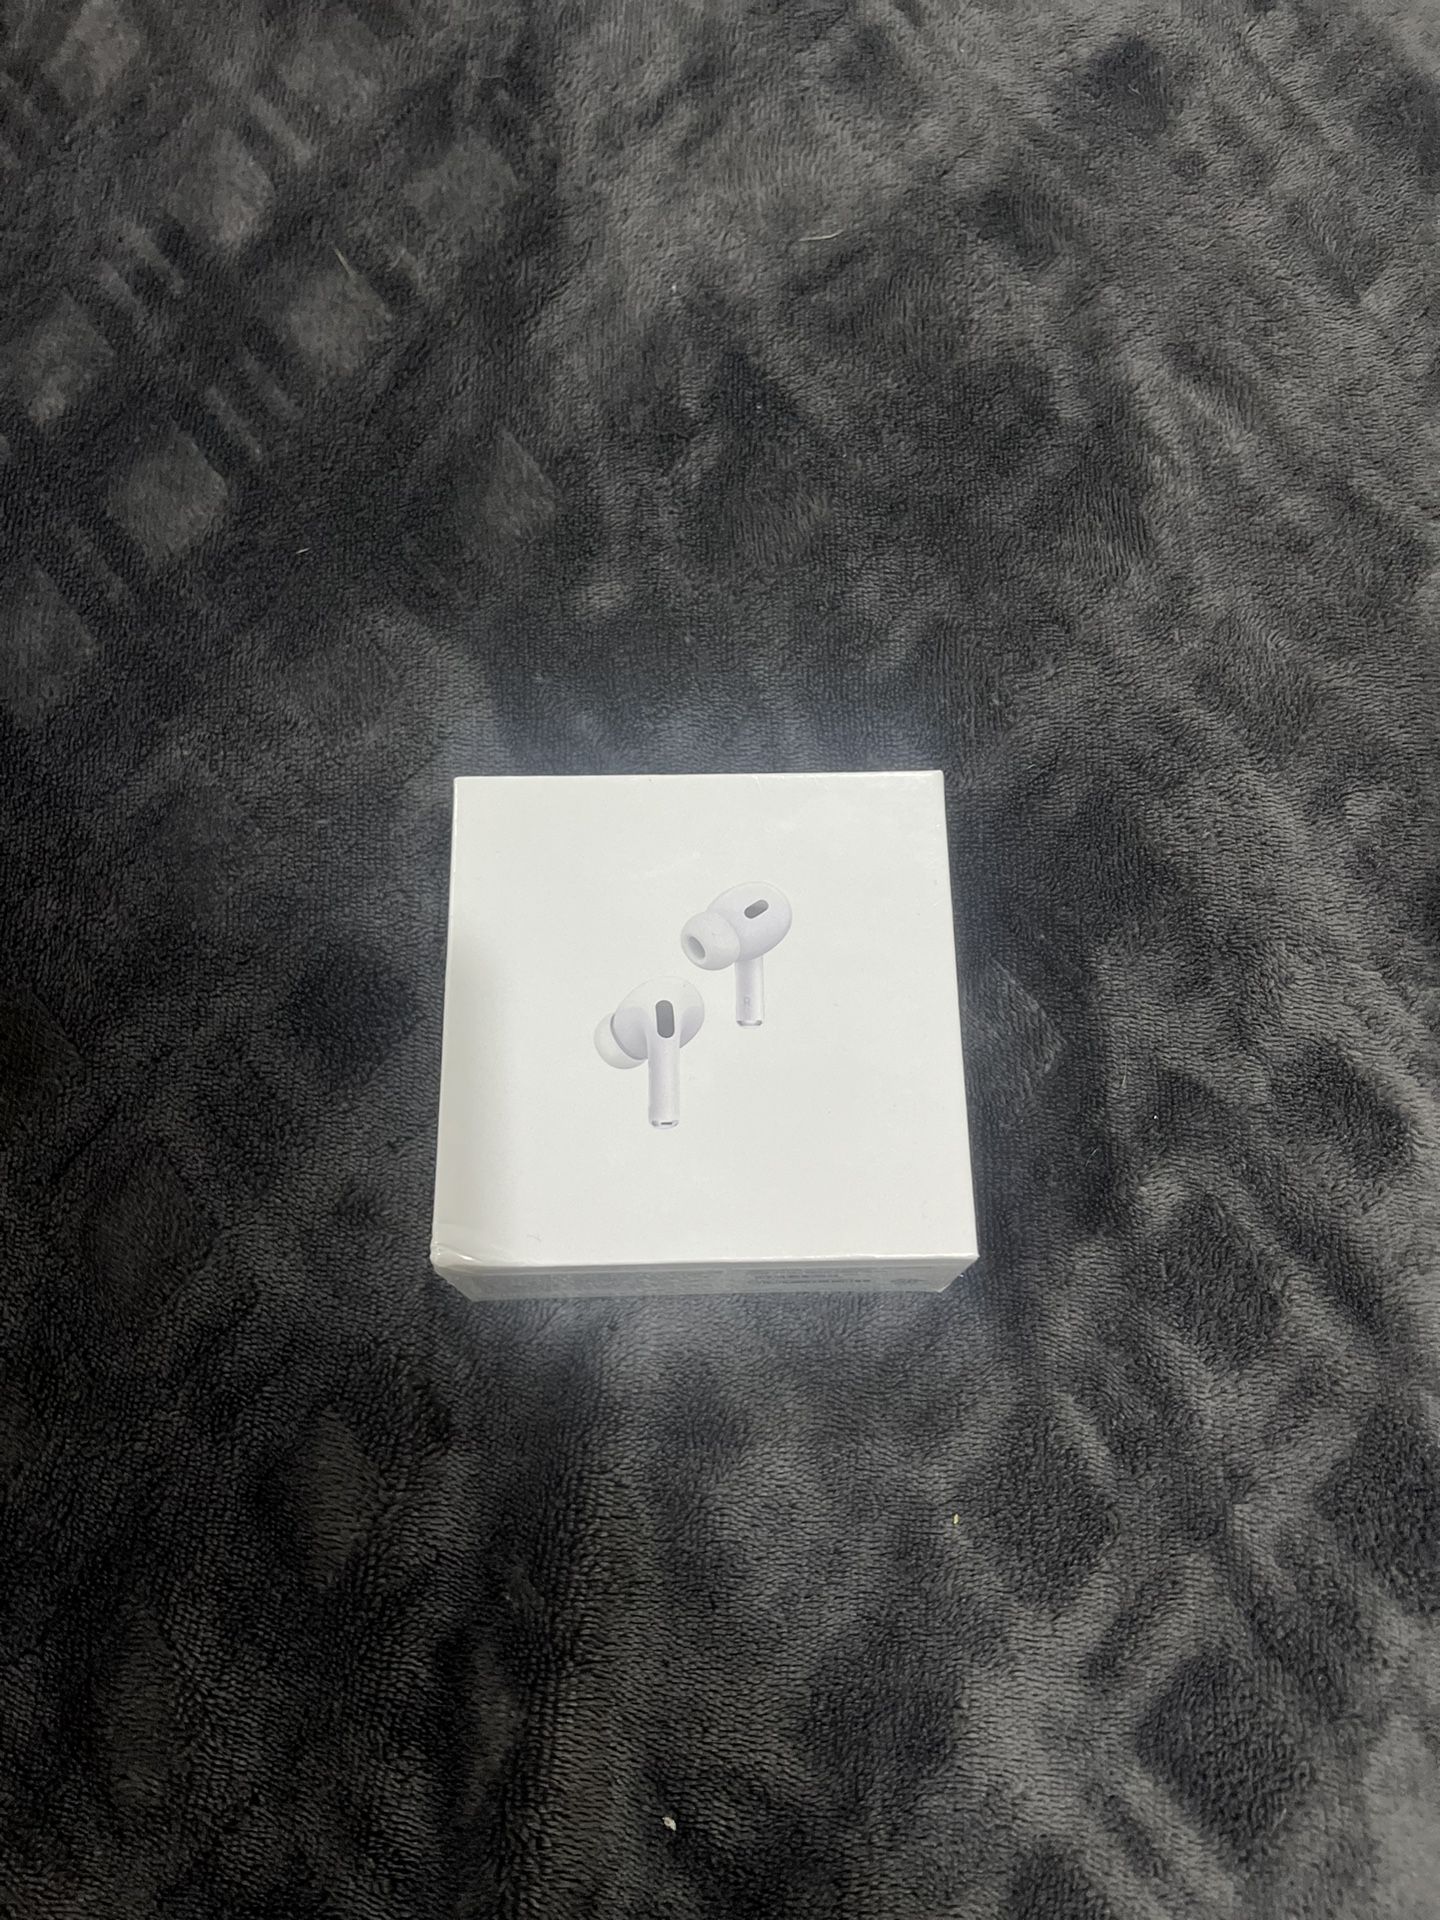 Apple AirPods Pro Gen 2 - BRAND NEW & SEALED